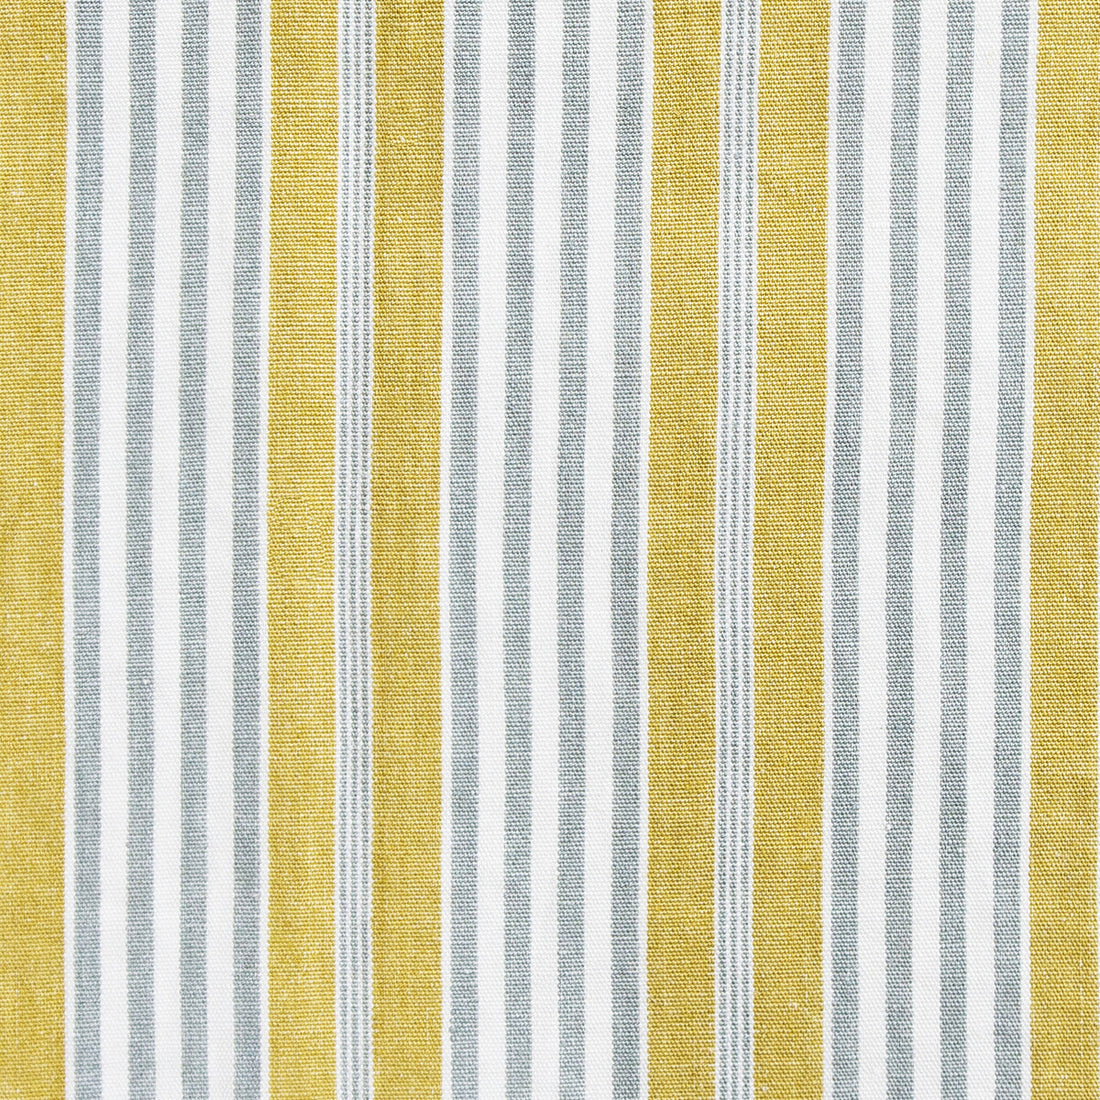 Hamptons fabric in lino/mostaza color - pattern GDT5561.002.0 - by Gaston y Daniela in the Gaston Luis Bustamante collection